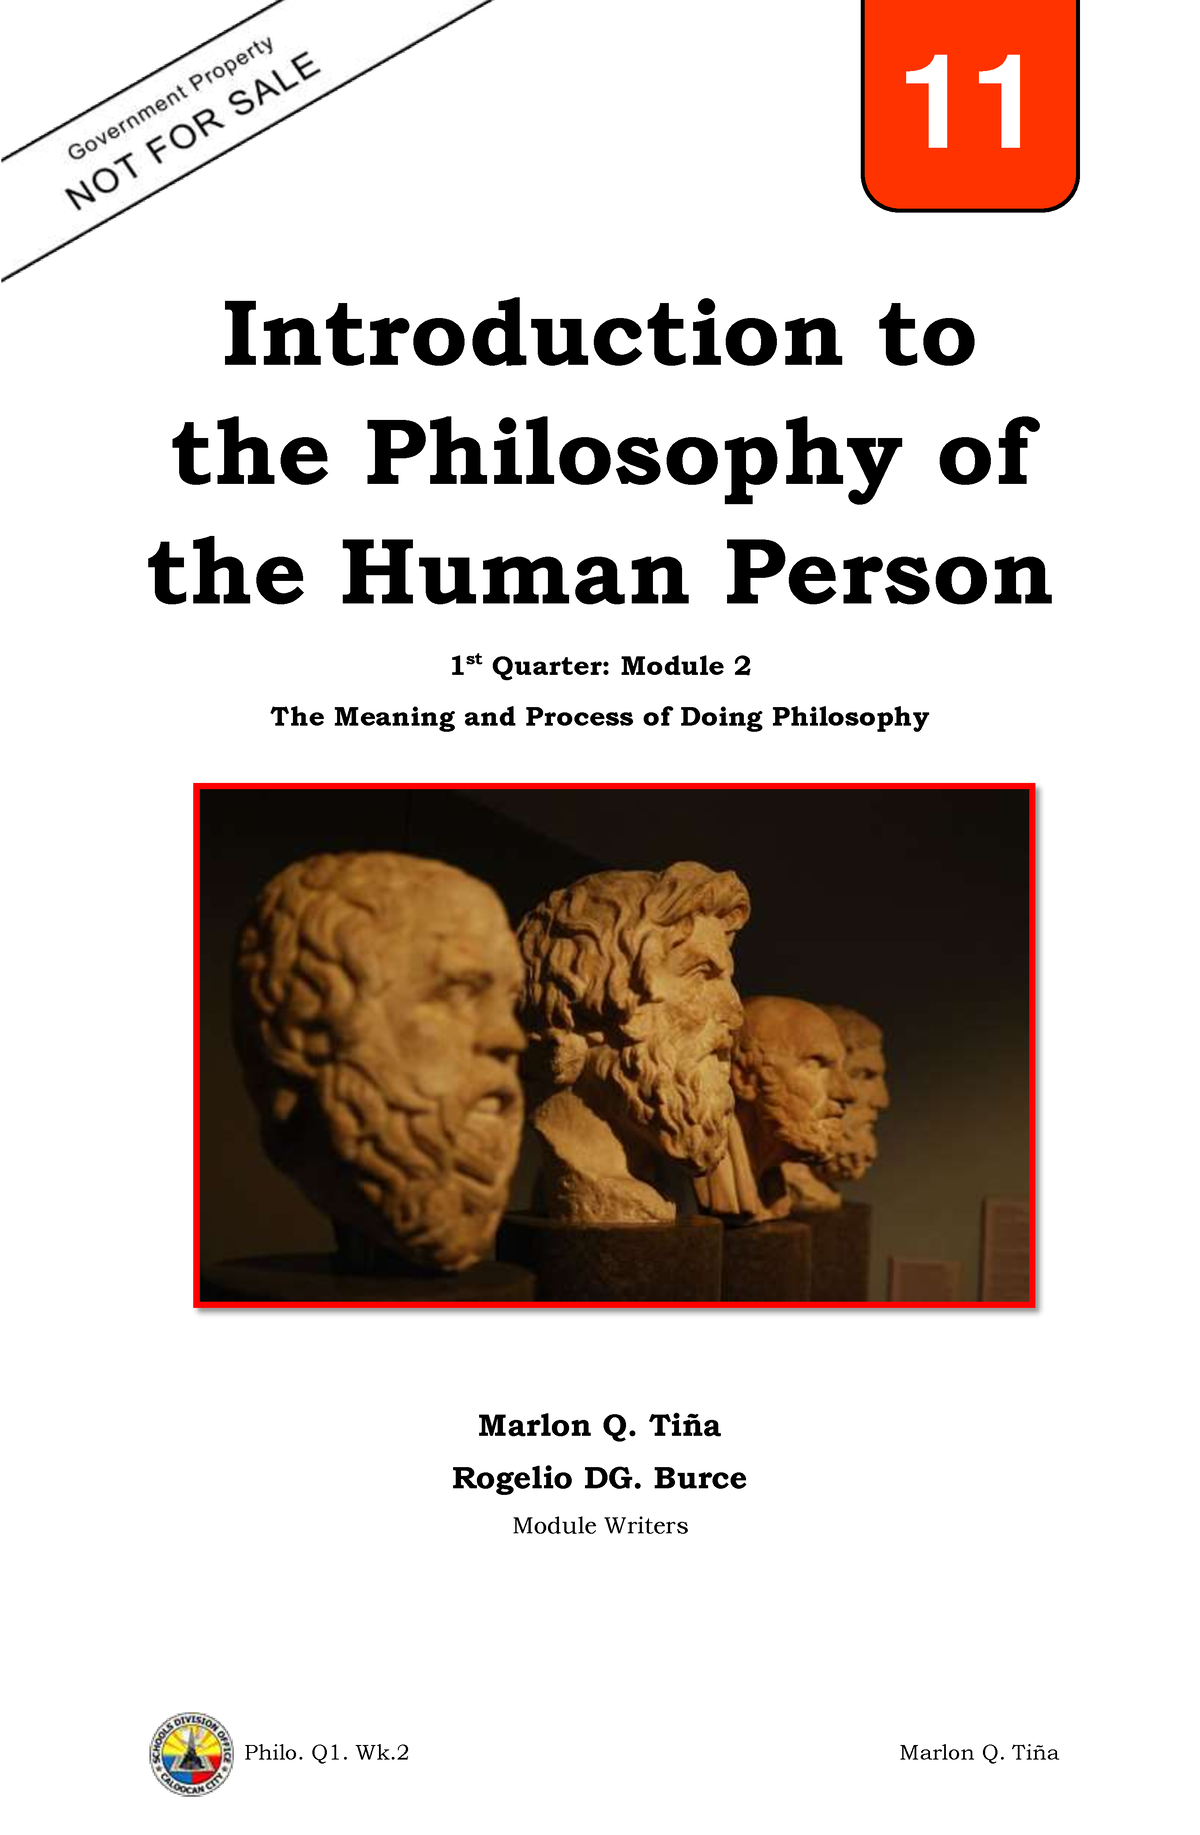 Q1w2 Relevant Files Philo Q1 Wk Marlon Q Tiña Introduction To The Philosophy Of The 9746